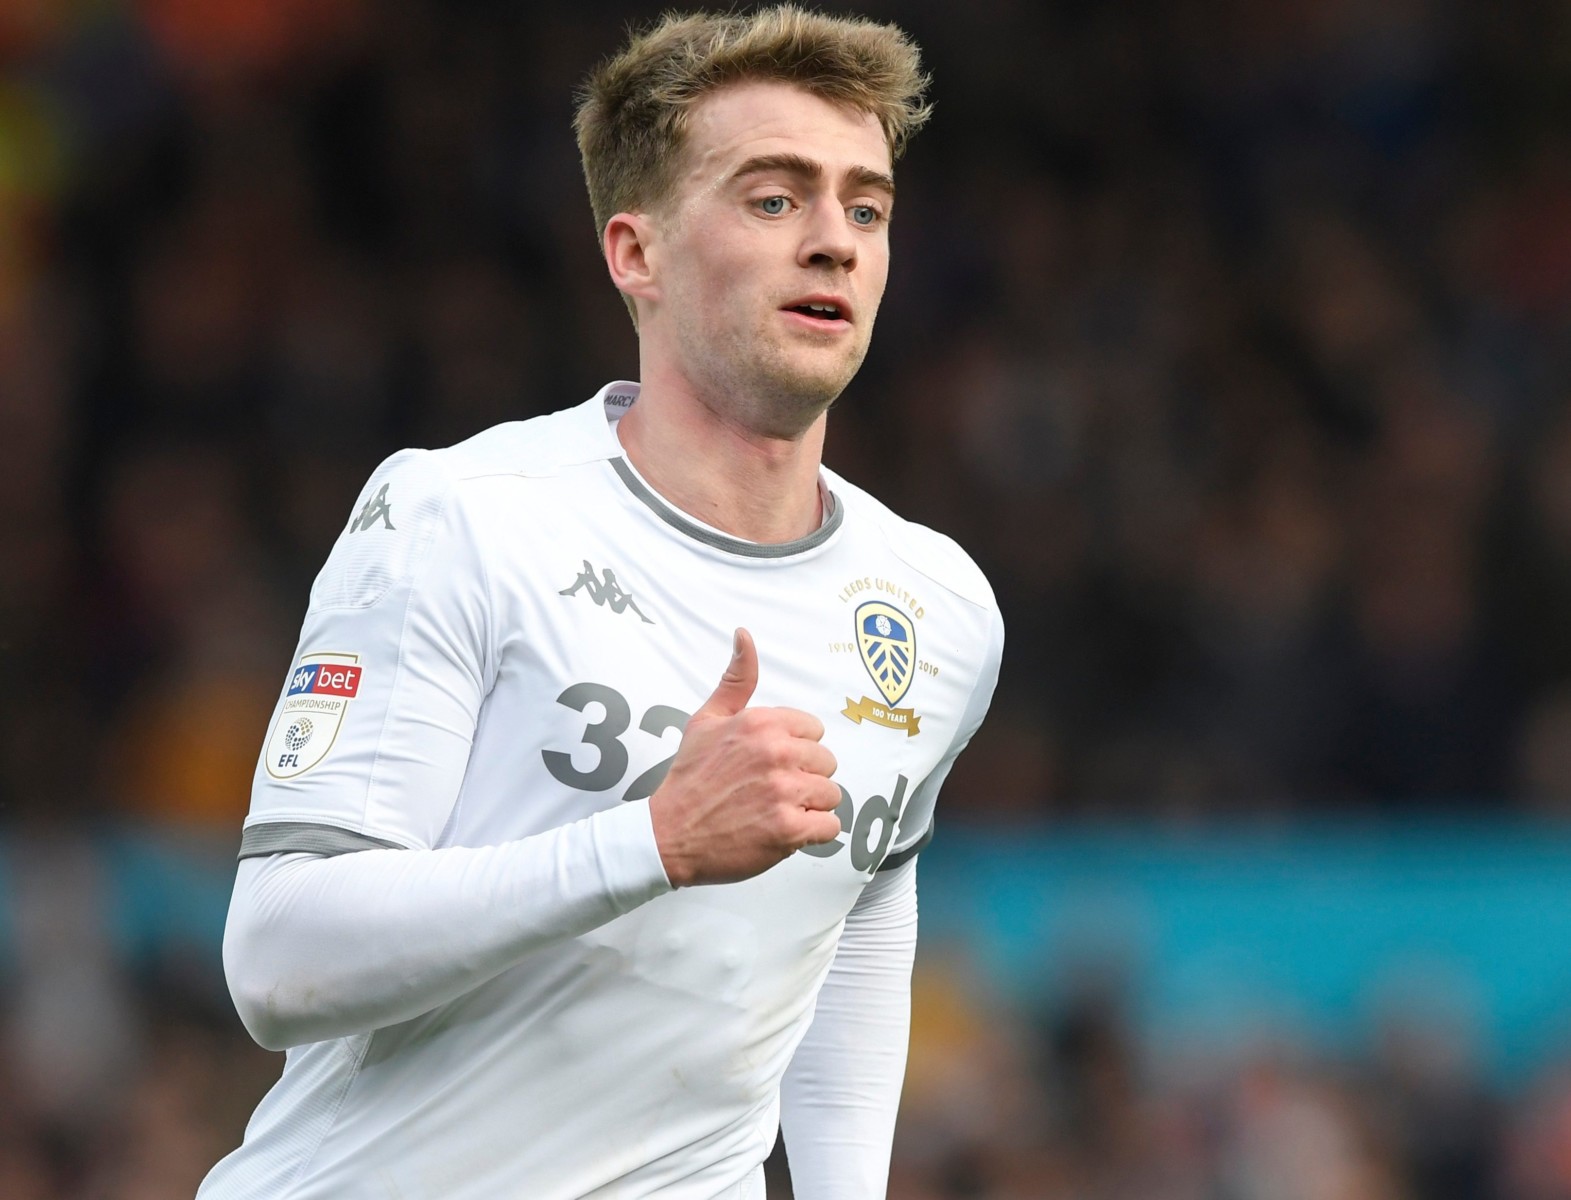 Patrick Bamford earns £40,000-a-week but will defer his wages